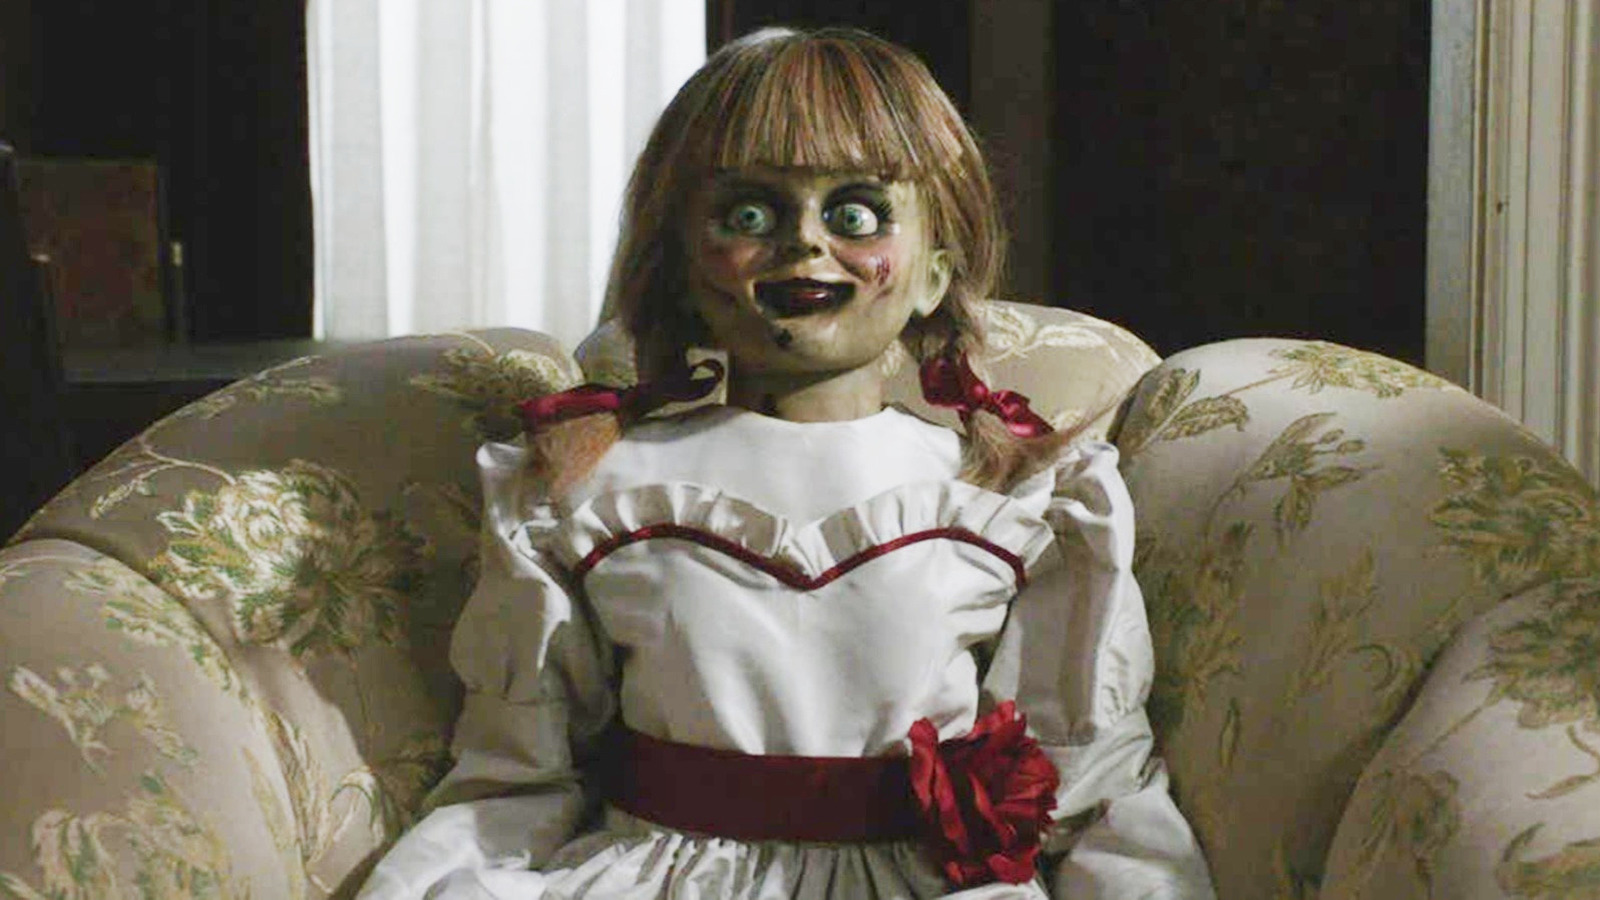 An Incredible Collection Of Over 999 Stunning Annabelle Images In Full 4k